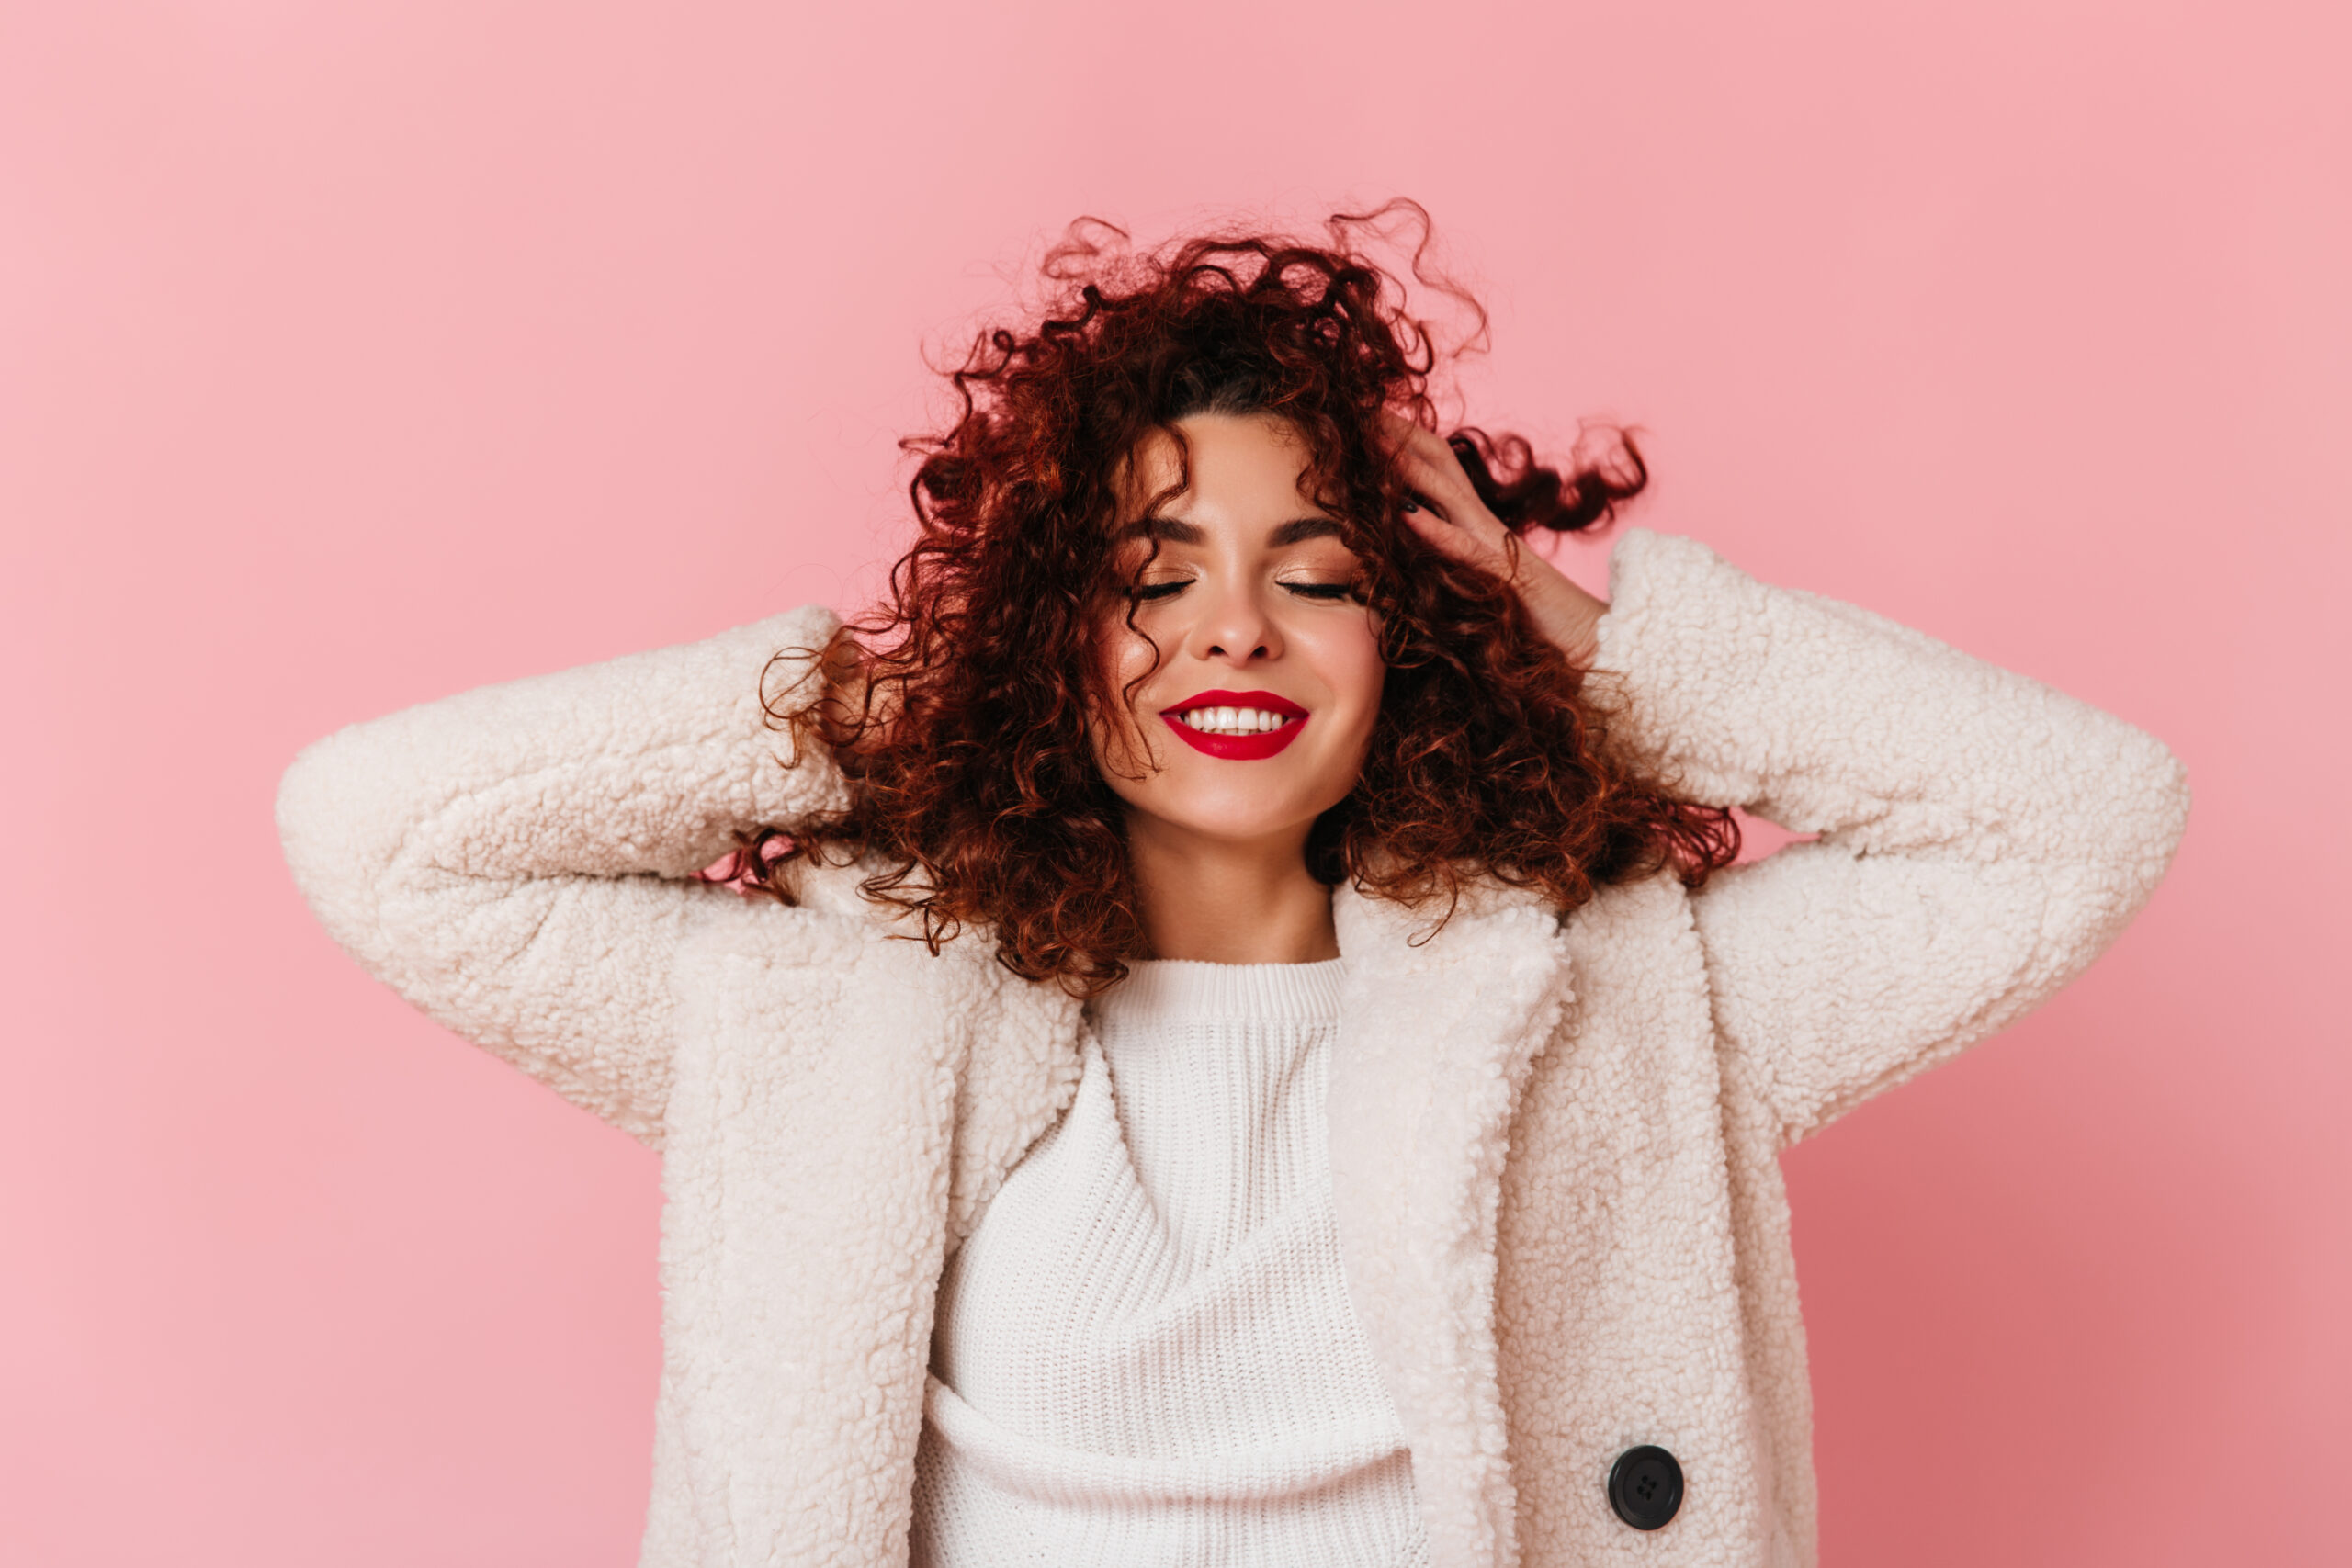 Portrait of charming lady with red lipstick and snow white smile dressed in bright eco coat and touching her curly hair on pink background.